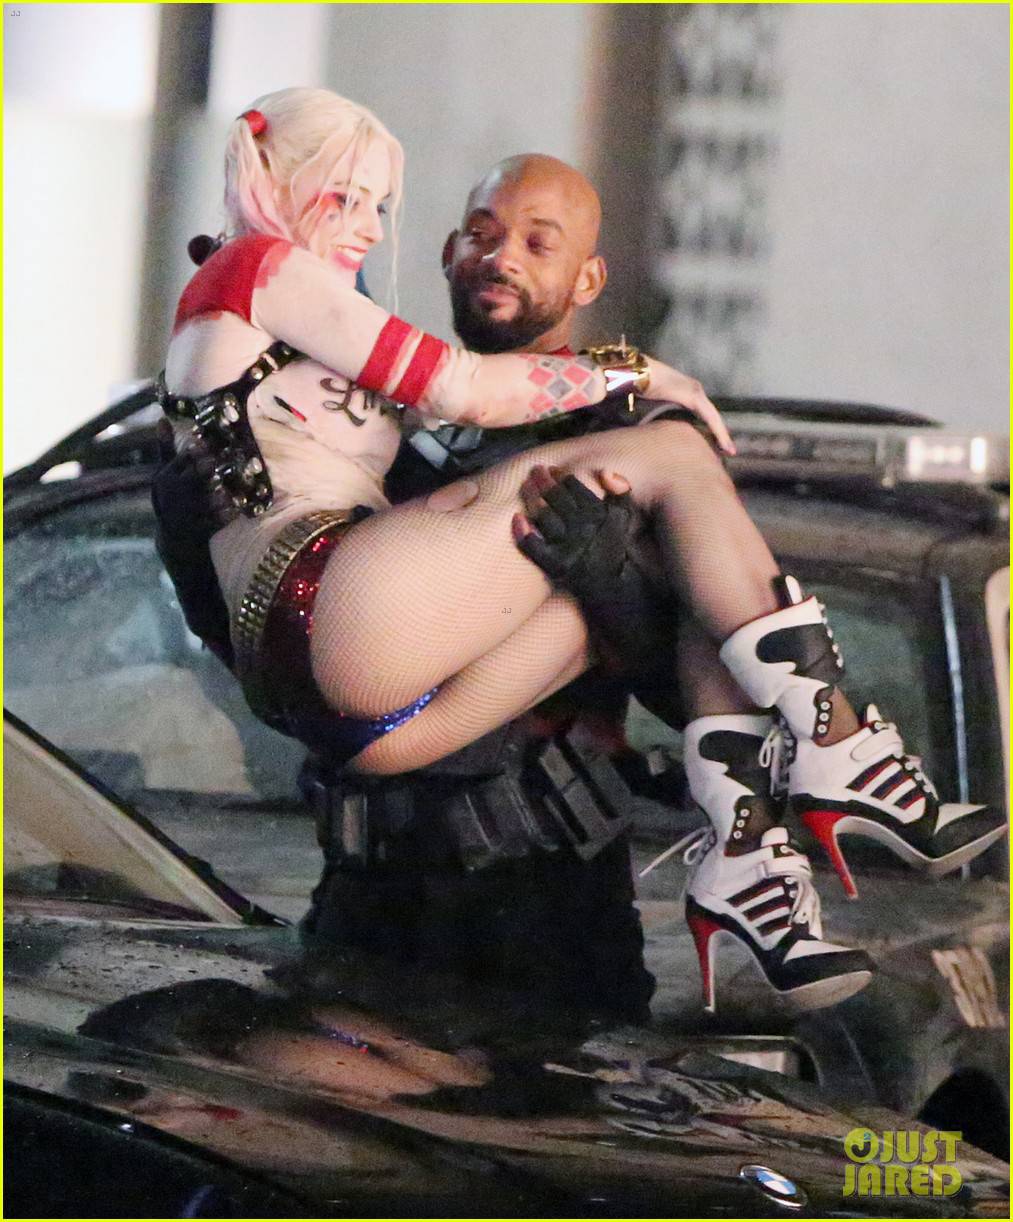 136928, EXCLUSIVE: Will Smith seen picking up Margot Robbie while filming 'Suicide Squad' in full costume. The Cast was filming on Bay street at 4am. The scene had fake rain that was pouring down on the stars and all seemed in good spirits about it. In movie Will Smith is seen as Deadshot, Margot Robbie as Harley Quinn, Jay Hernandez as El Diablo, Adam Beach, Adewale Akinnuoye-Agbaje as Killer Croc, Jai Courtney as Captain Boomerang, and Karen Fukuhara as Plastique. Will and Margot are re-united for the film after starring in the movie 'Focus' together, released in early 2015. Toronto, Canada - Saturday May 09, 2015. CANADA OUT Photograph: © PacificCoastNews. Los Angeles Office: +1 310.822.0419 sales@pacificcoastnews.com FEE MUST BE AGREED PRIOR TO USAGE